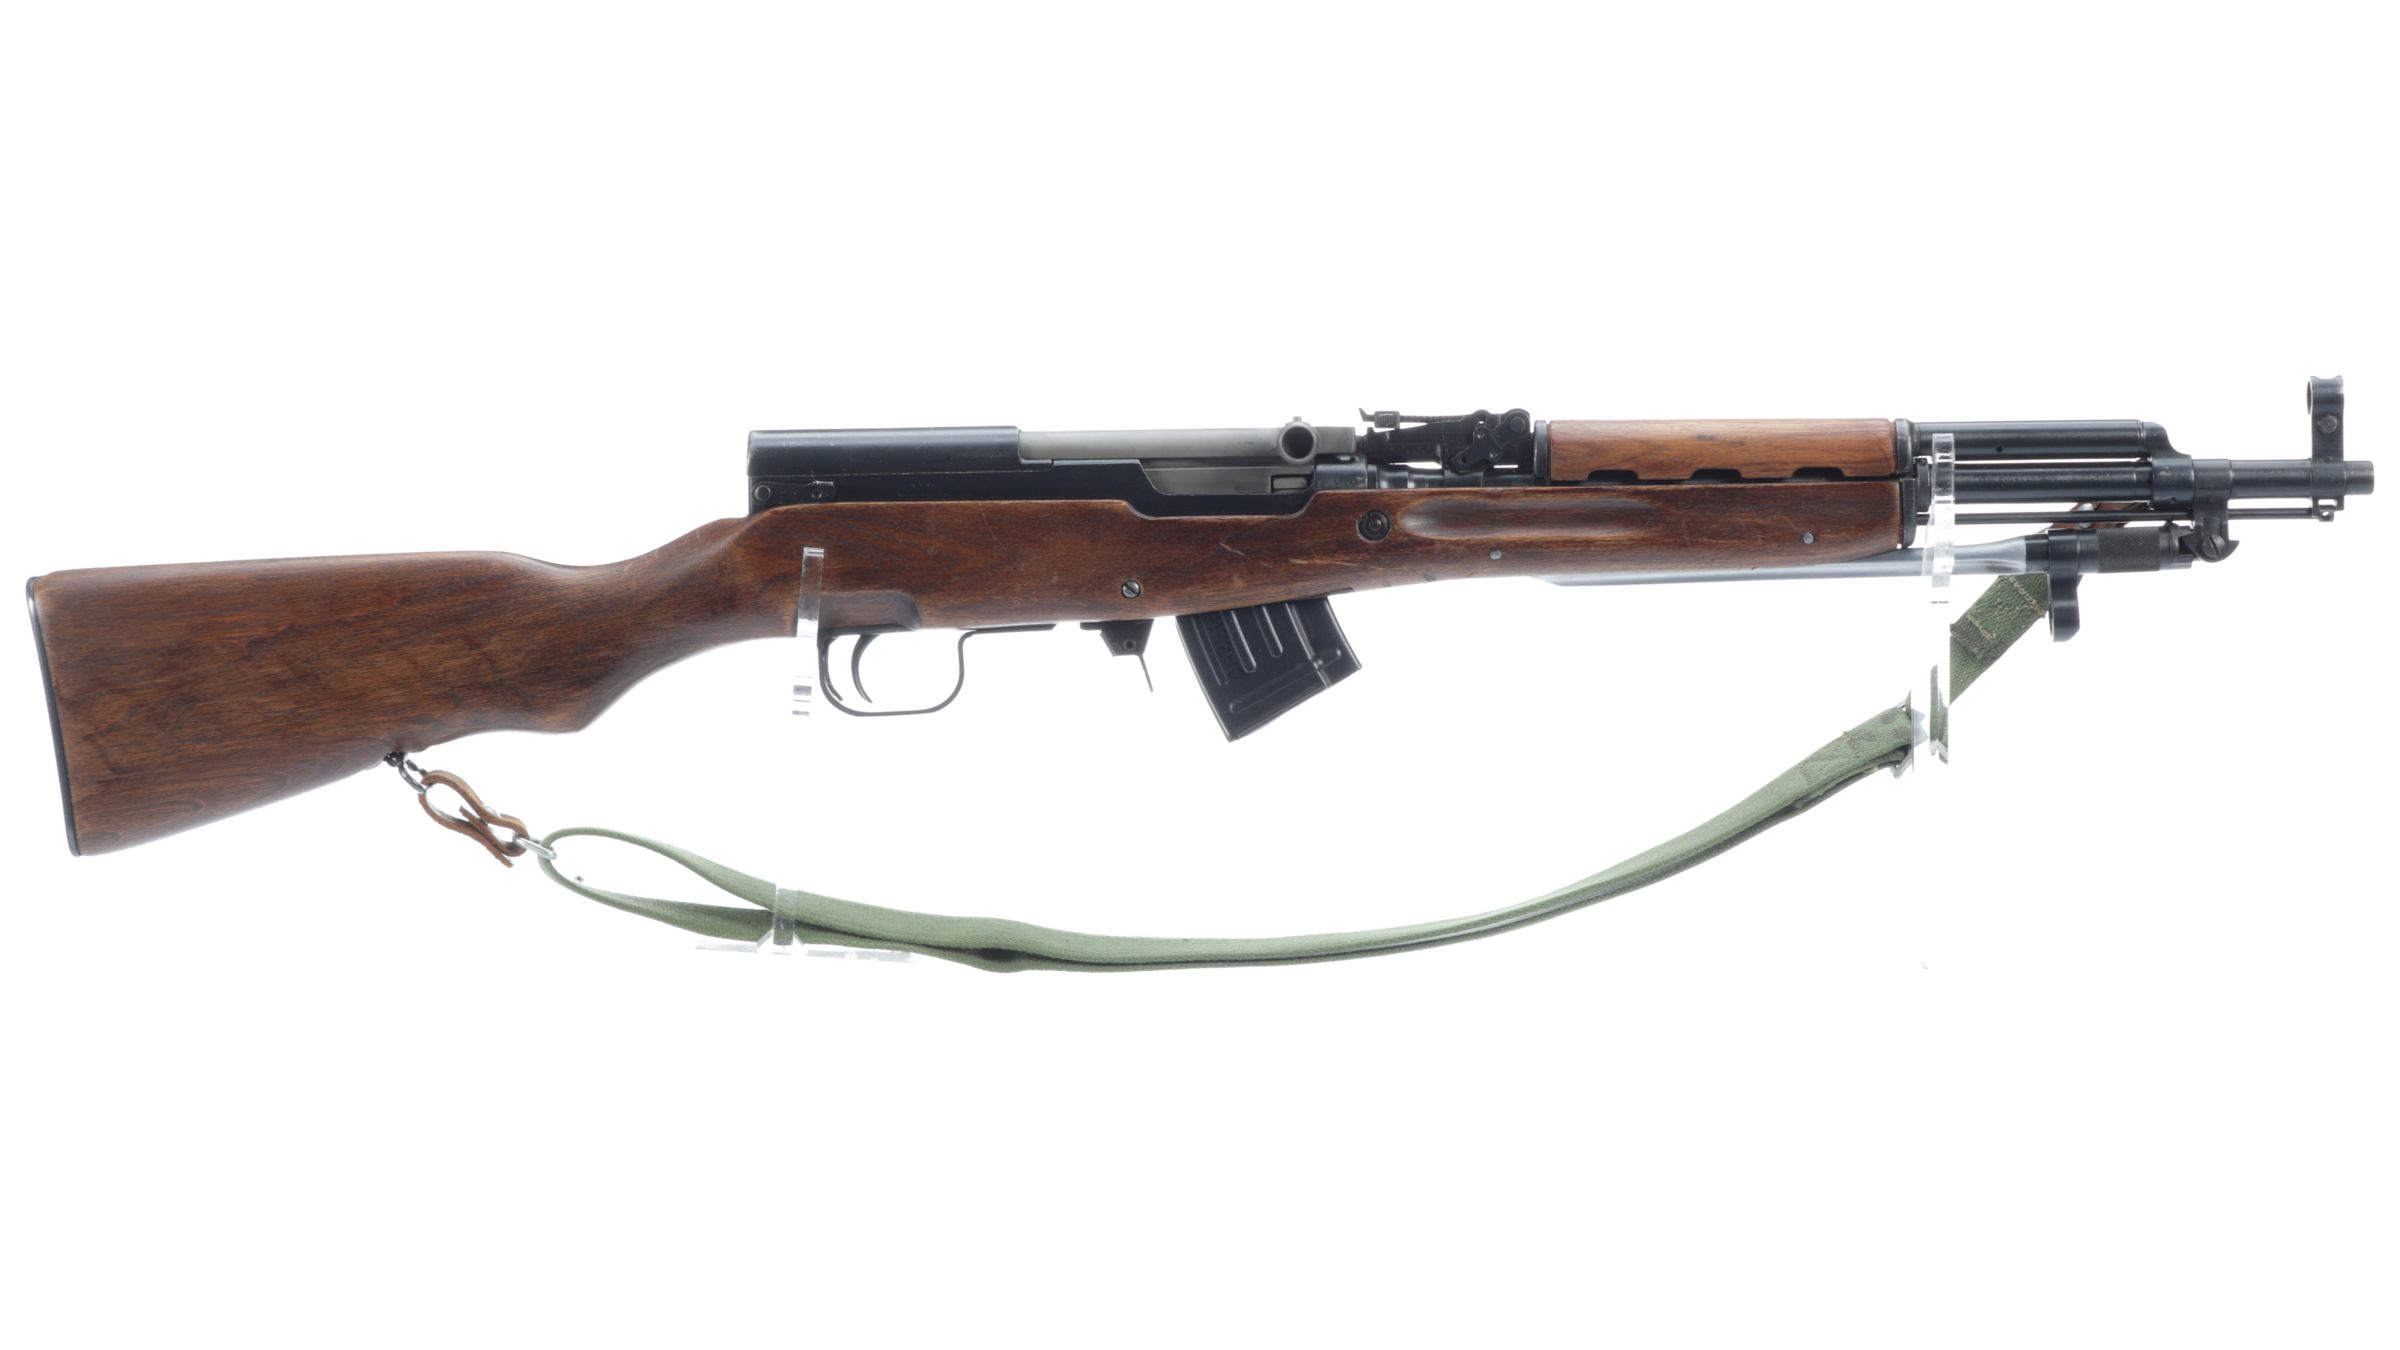 Chinese SKS SemiAutomatic Carbine